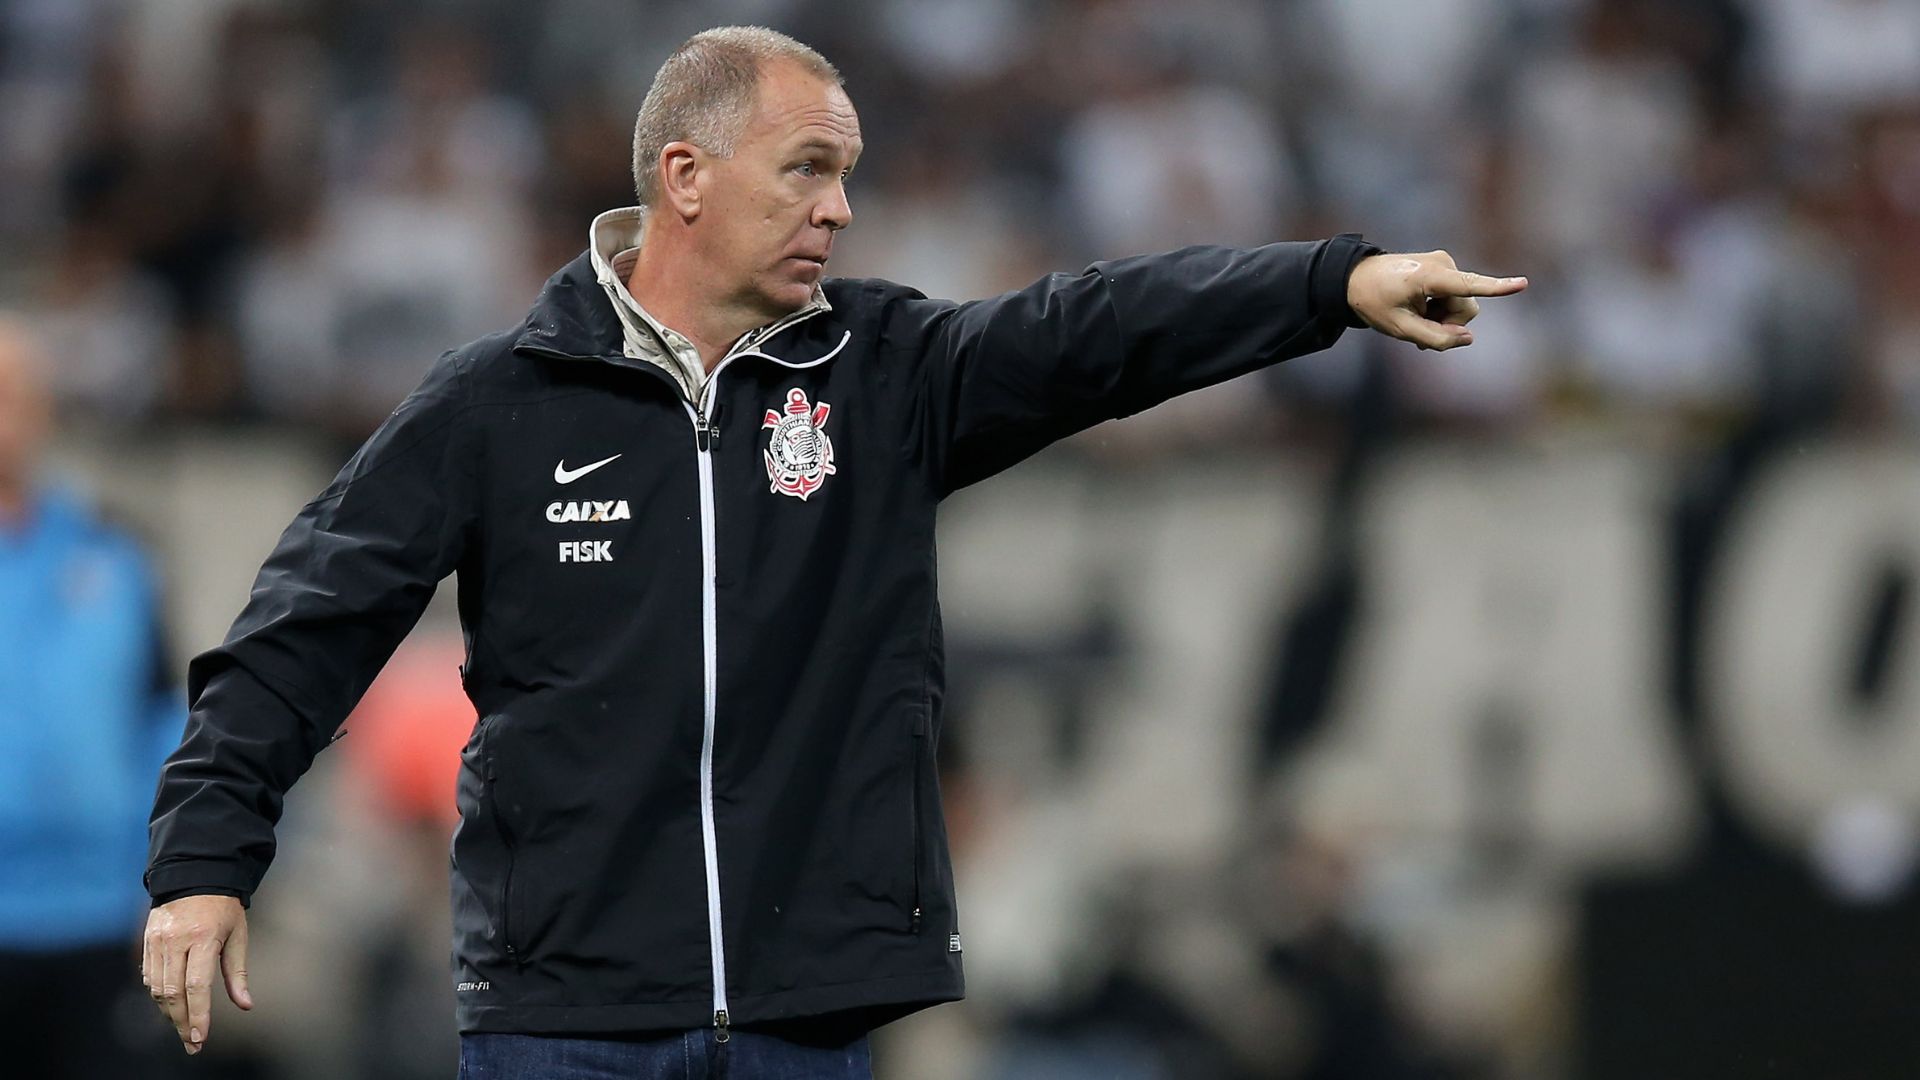 Mano Menezes in his second spell at Corinthians (Credit: Getty Images)